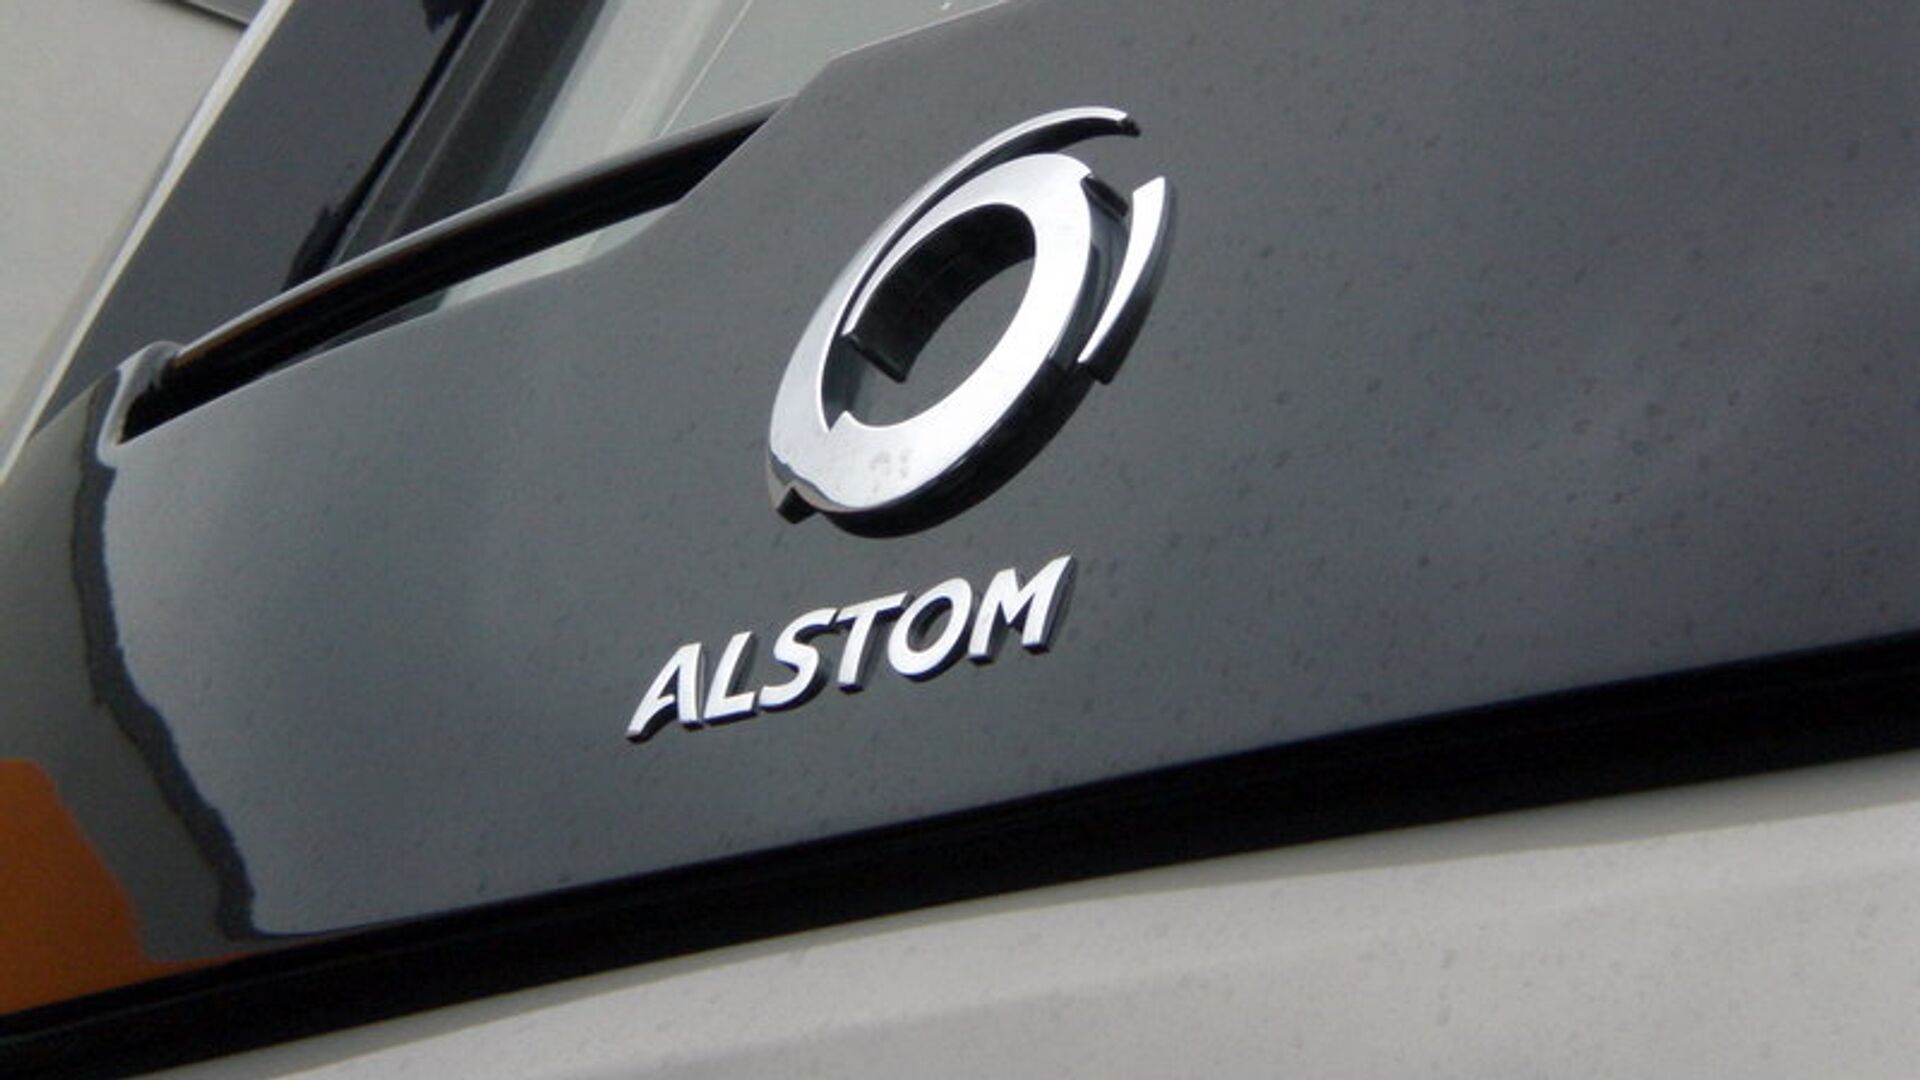 The logo of French conglomerate Alstom, as seen on the front side of the Alstom Prima II locomotive, just beneath the driver's window. - Sputnik Afrique, 1920, 26.02.2022